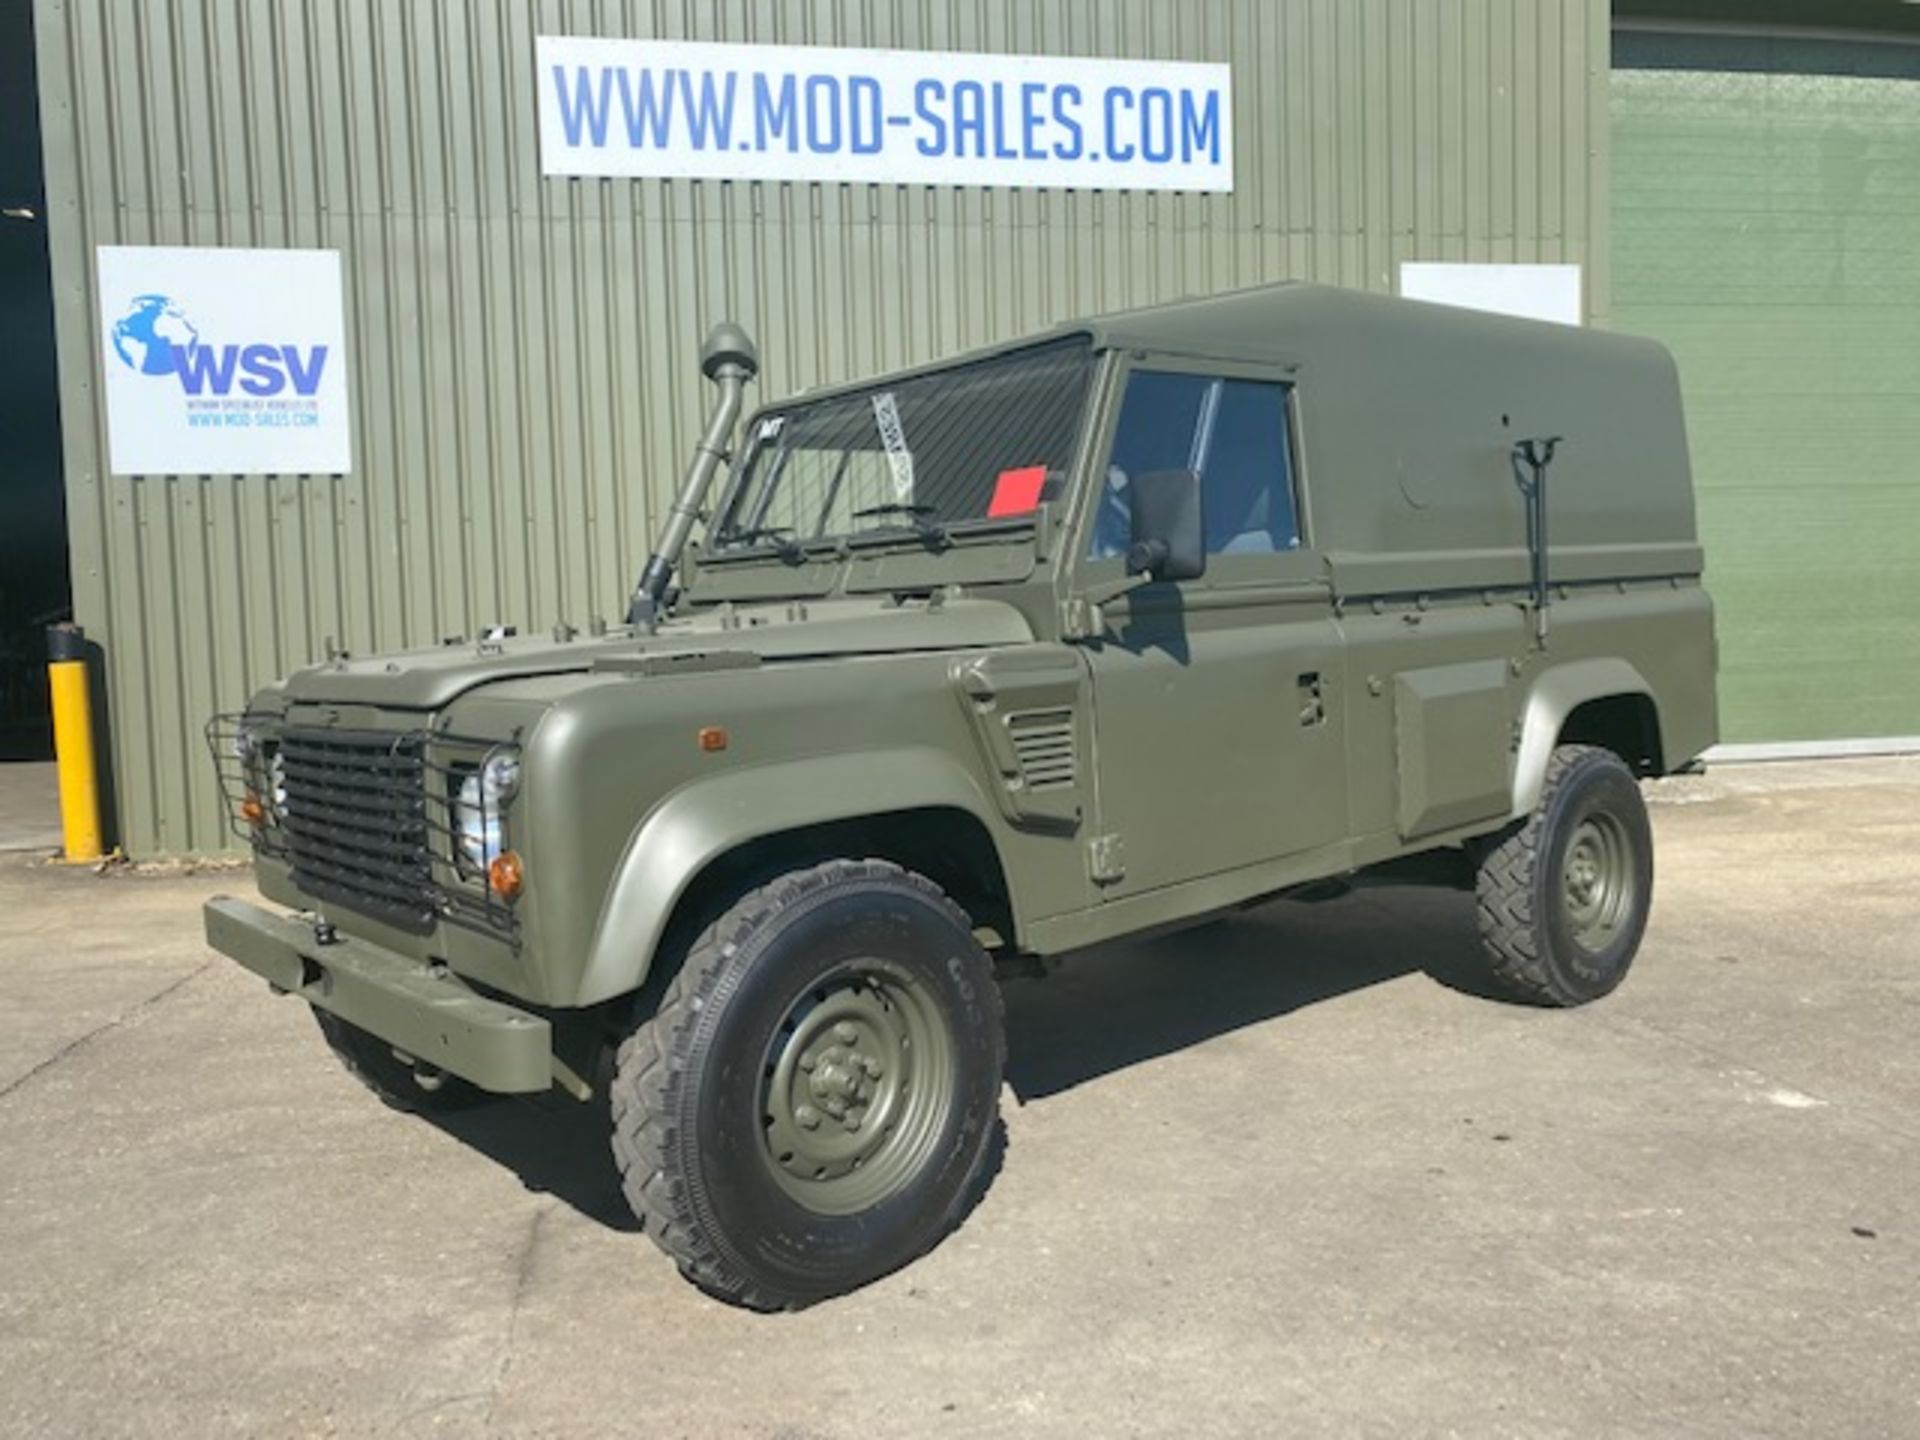 1997 Military Specification Left Hand Drive Land Rover Wolf 110 FFR Hard Top ONLY 172,783Km - Image 5 of 50